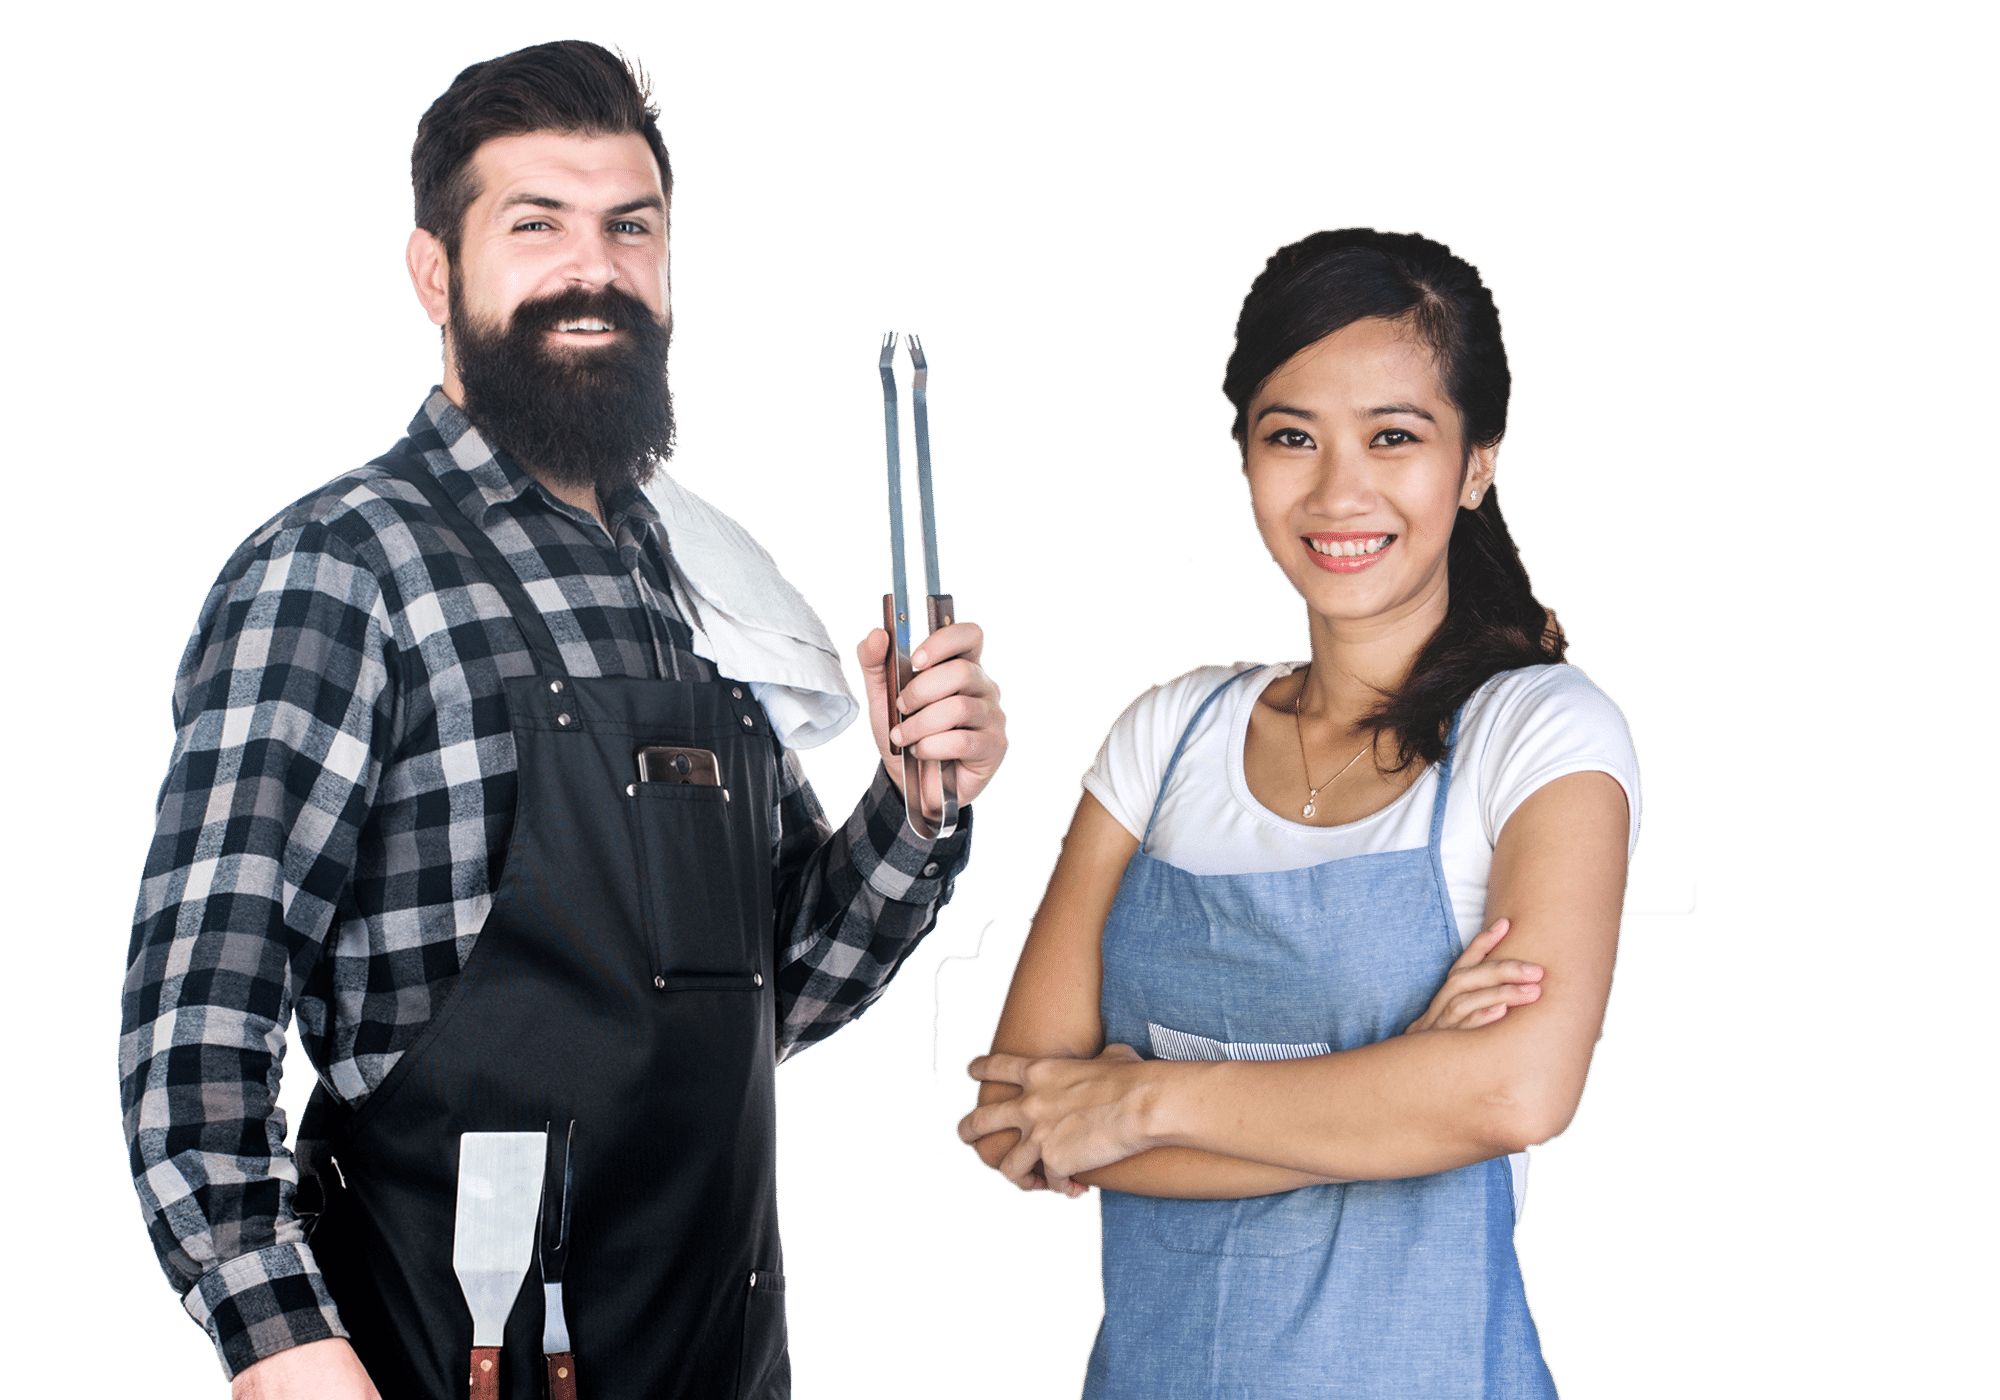 Couple wearing aprons with grilling tools